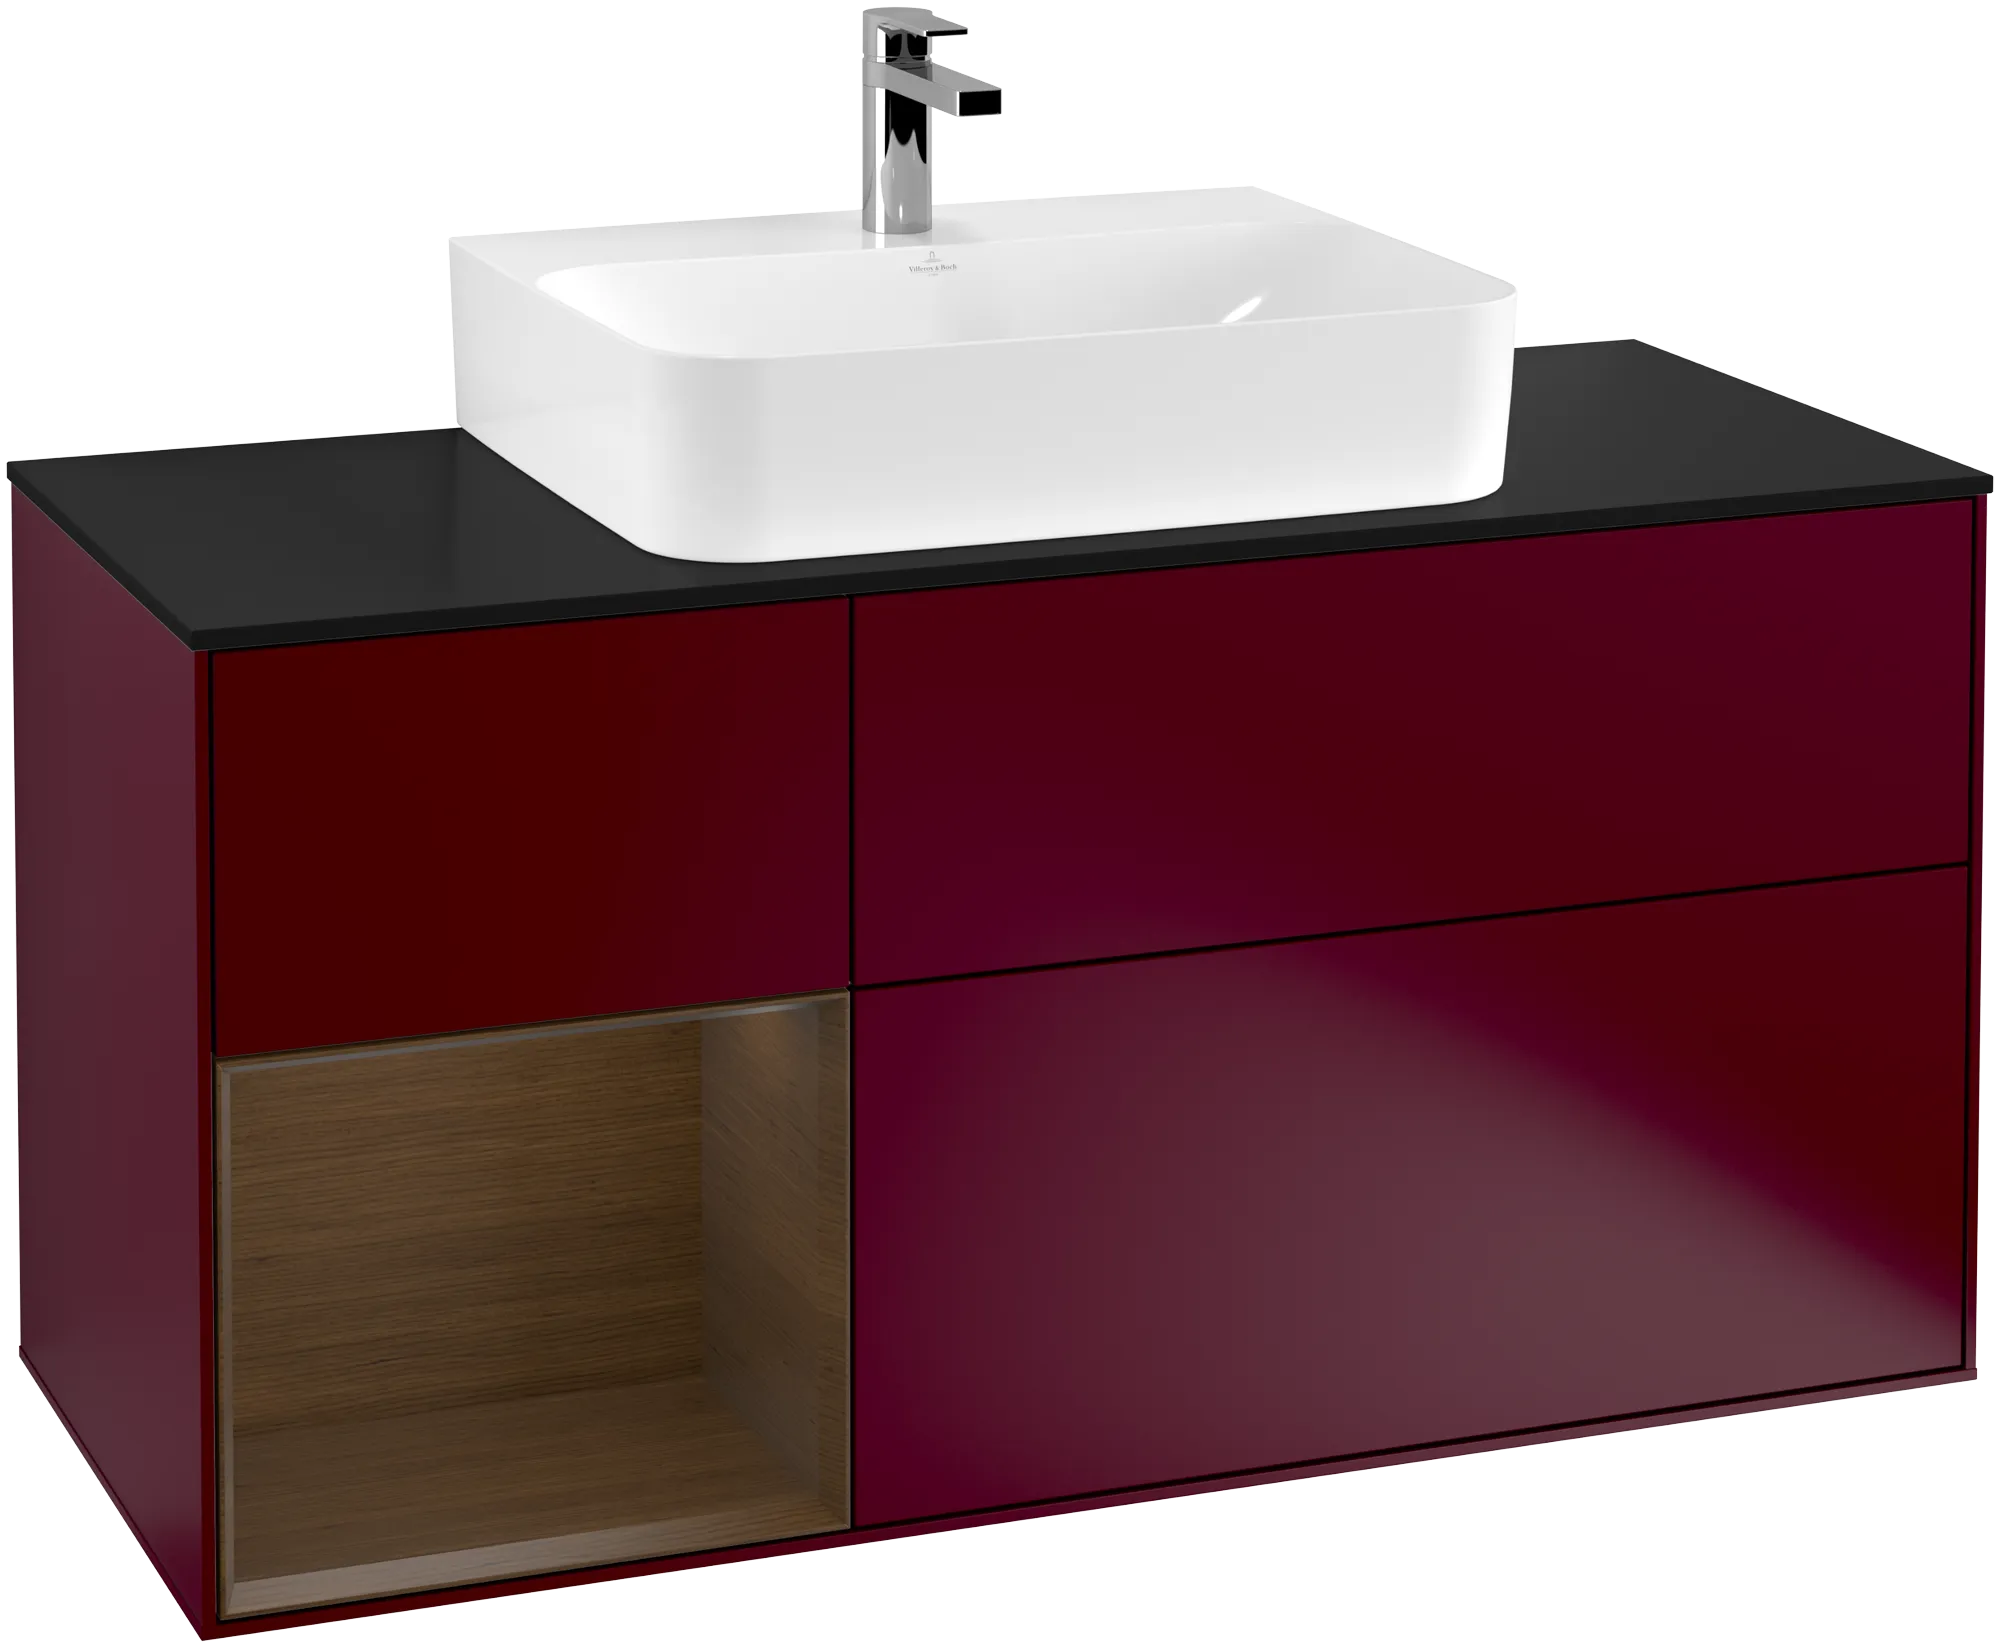 Picture of VILLEROY BOCH Finion Vanity unit, with lighting, 3 pull-out compartments, 1200 x 603 x 501 mm, Peony Matt Lacquer / Walnut Veneer / Glass Black Matt #G162GNHB